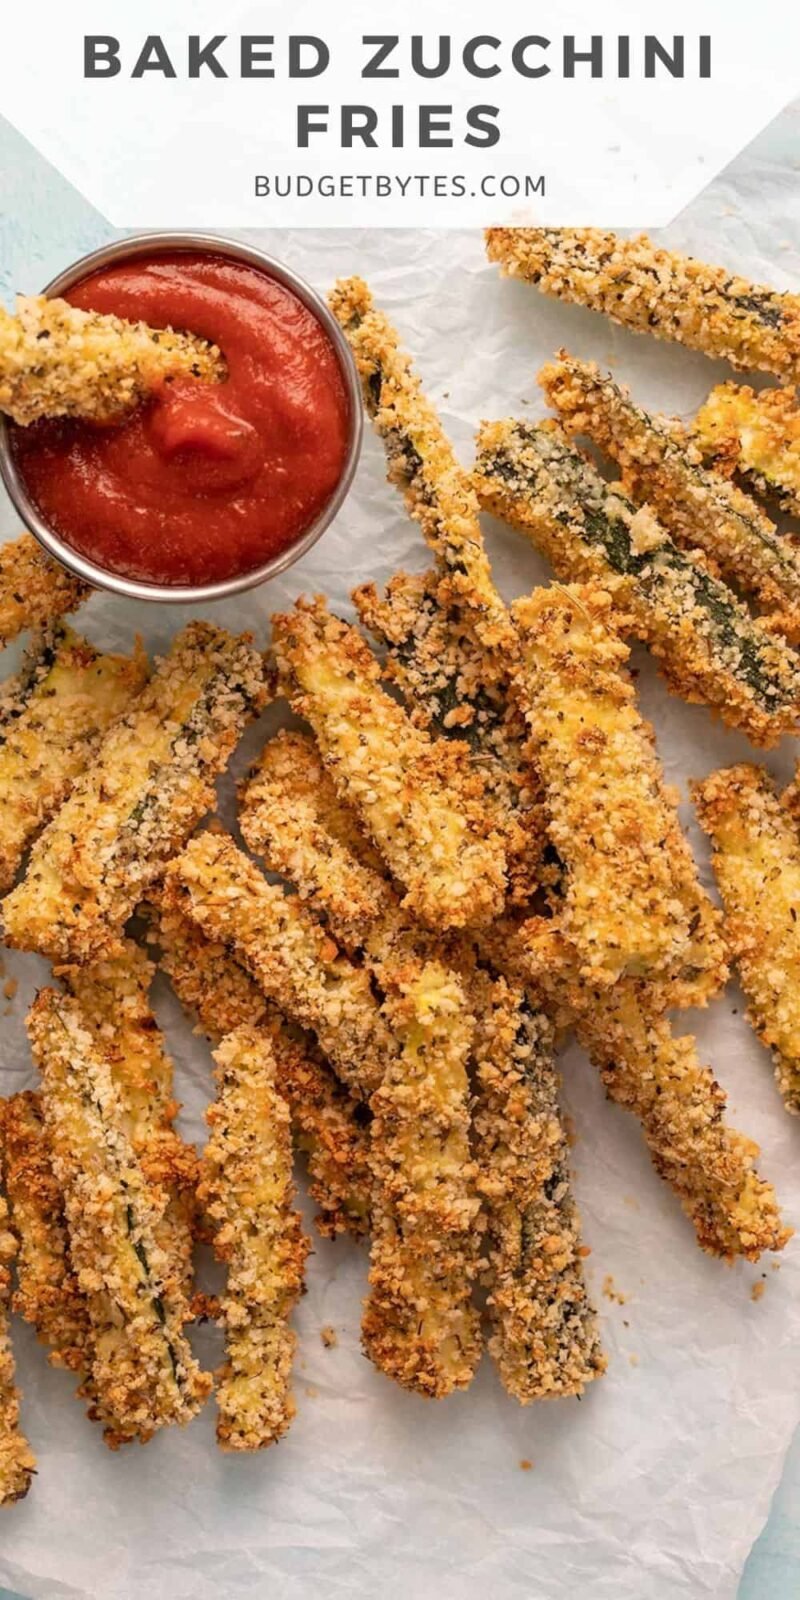 Baked Zucchini Fries on a piece of parchment with a dish of pizza sauce.